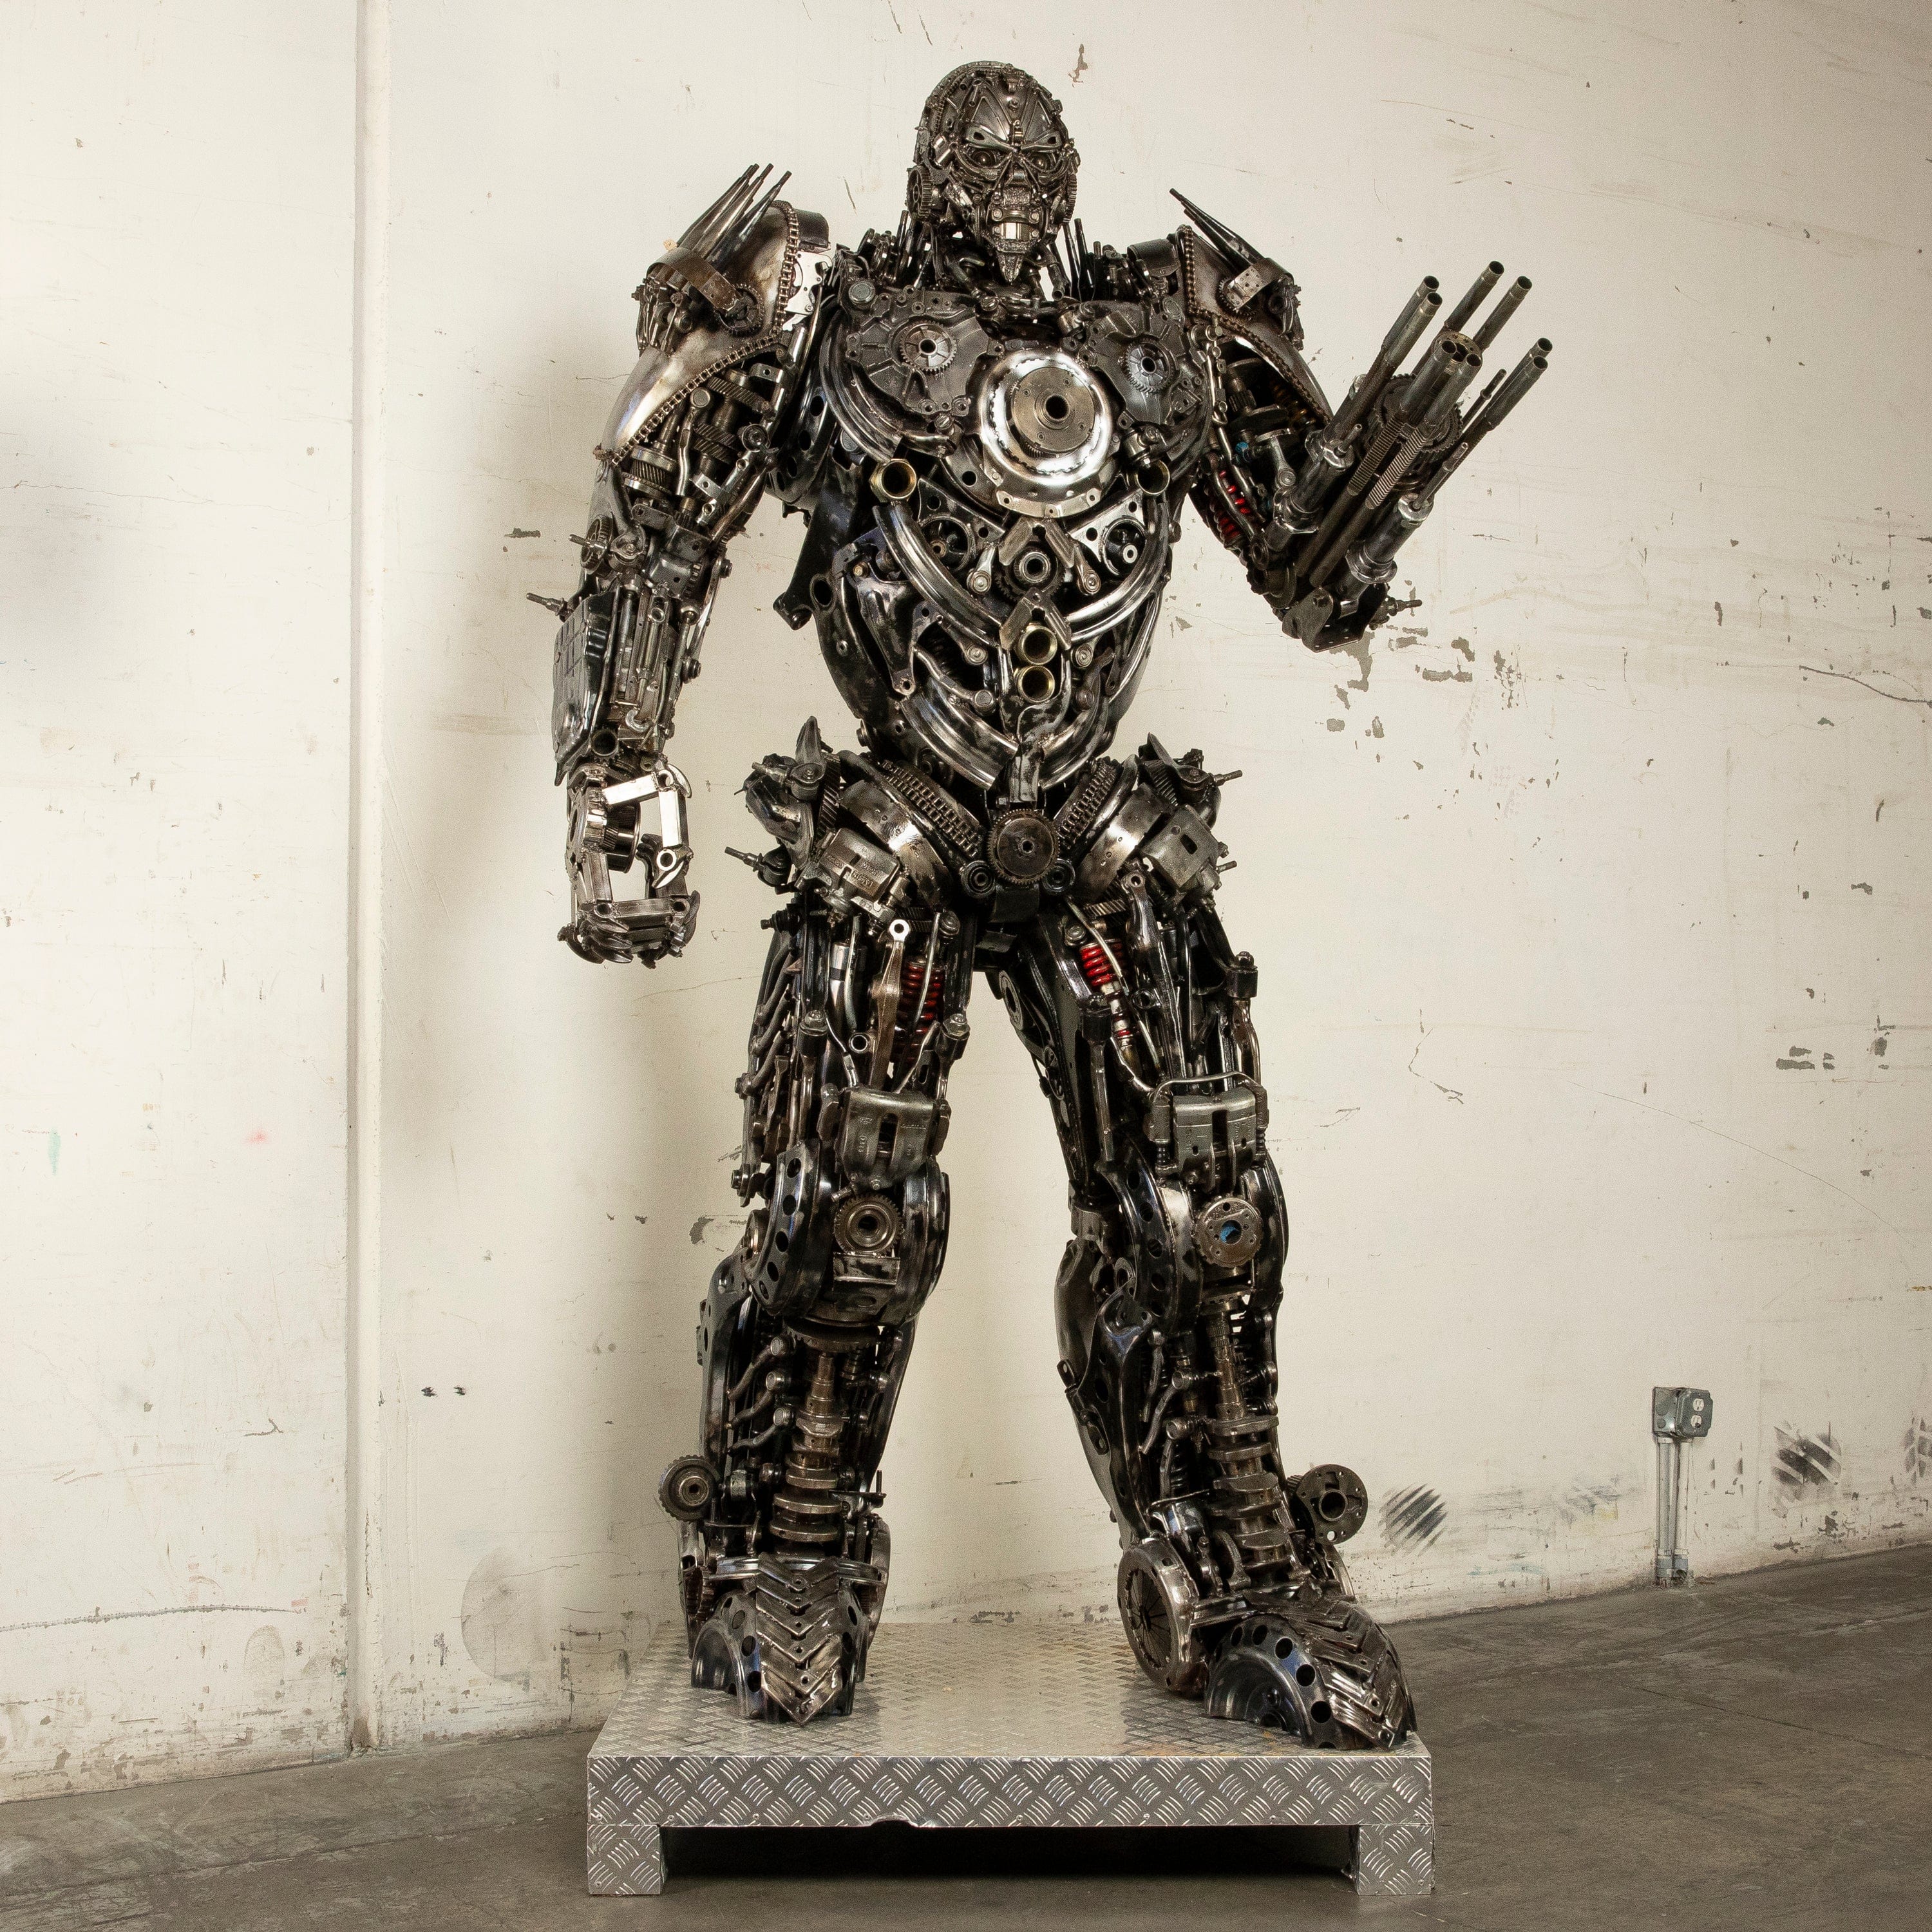 Kalifano Recycled Metal Art 102" Lockdown Decepticon Inspired Recycled Metal Art Sculpture RMS-LD260-S01